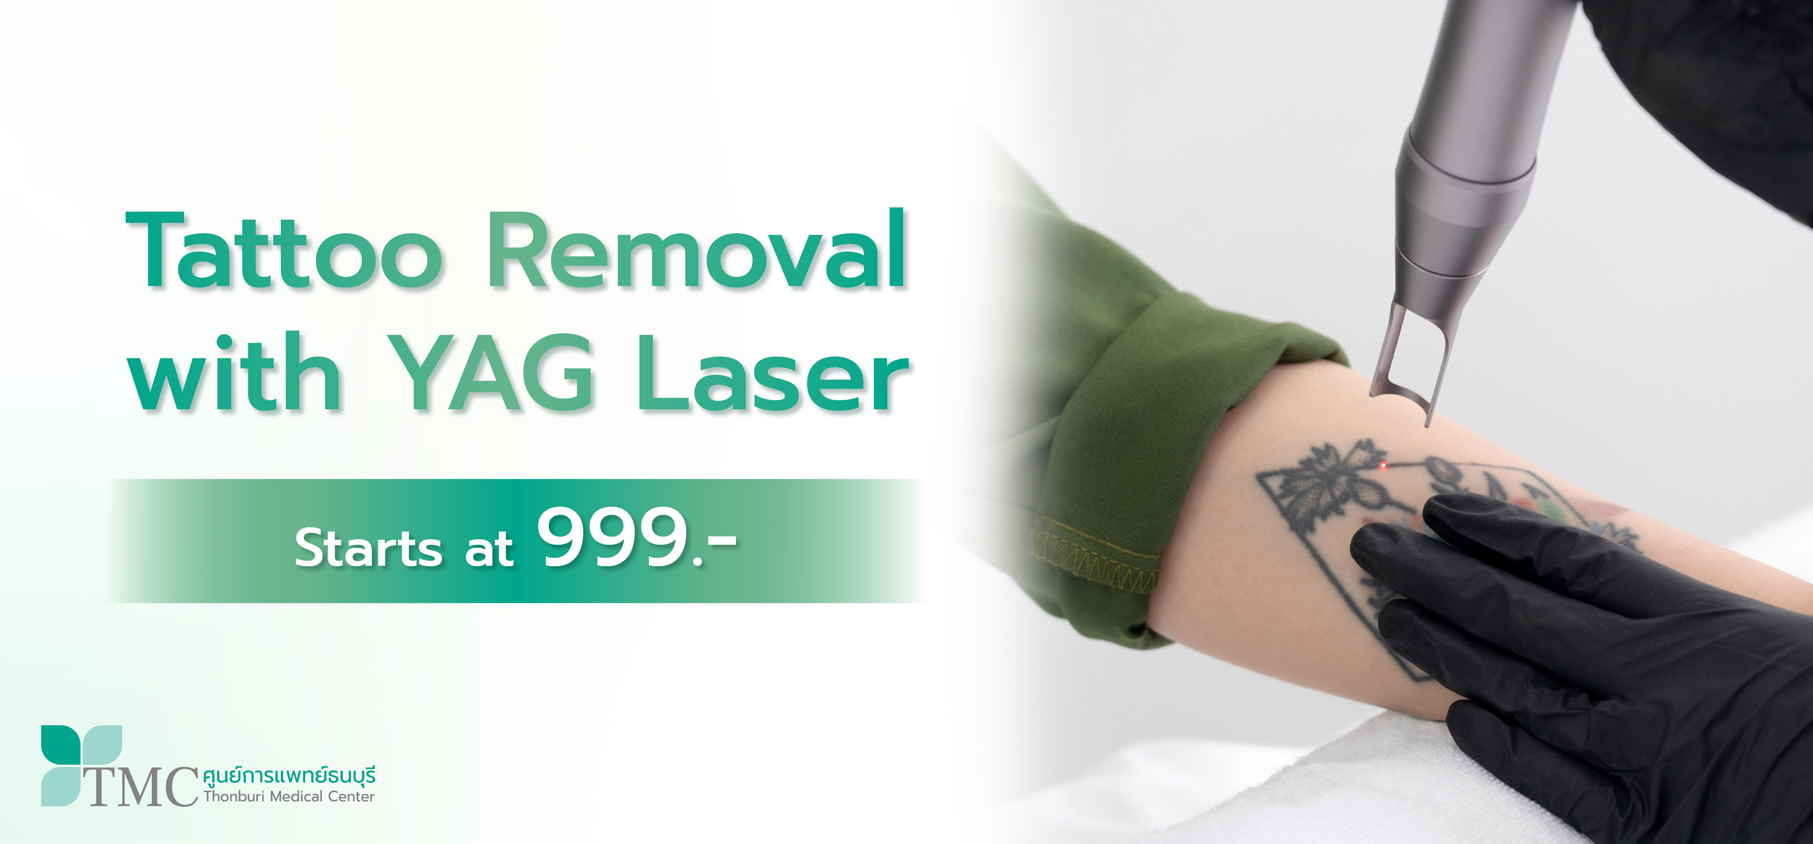 Tattoo Removal with YAG Laser